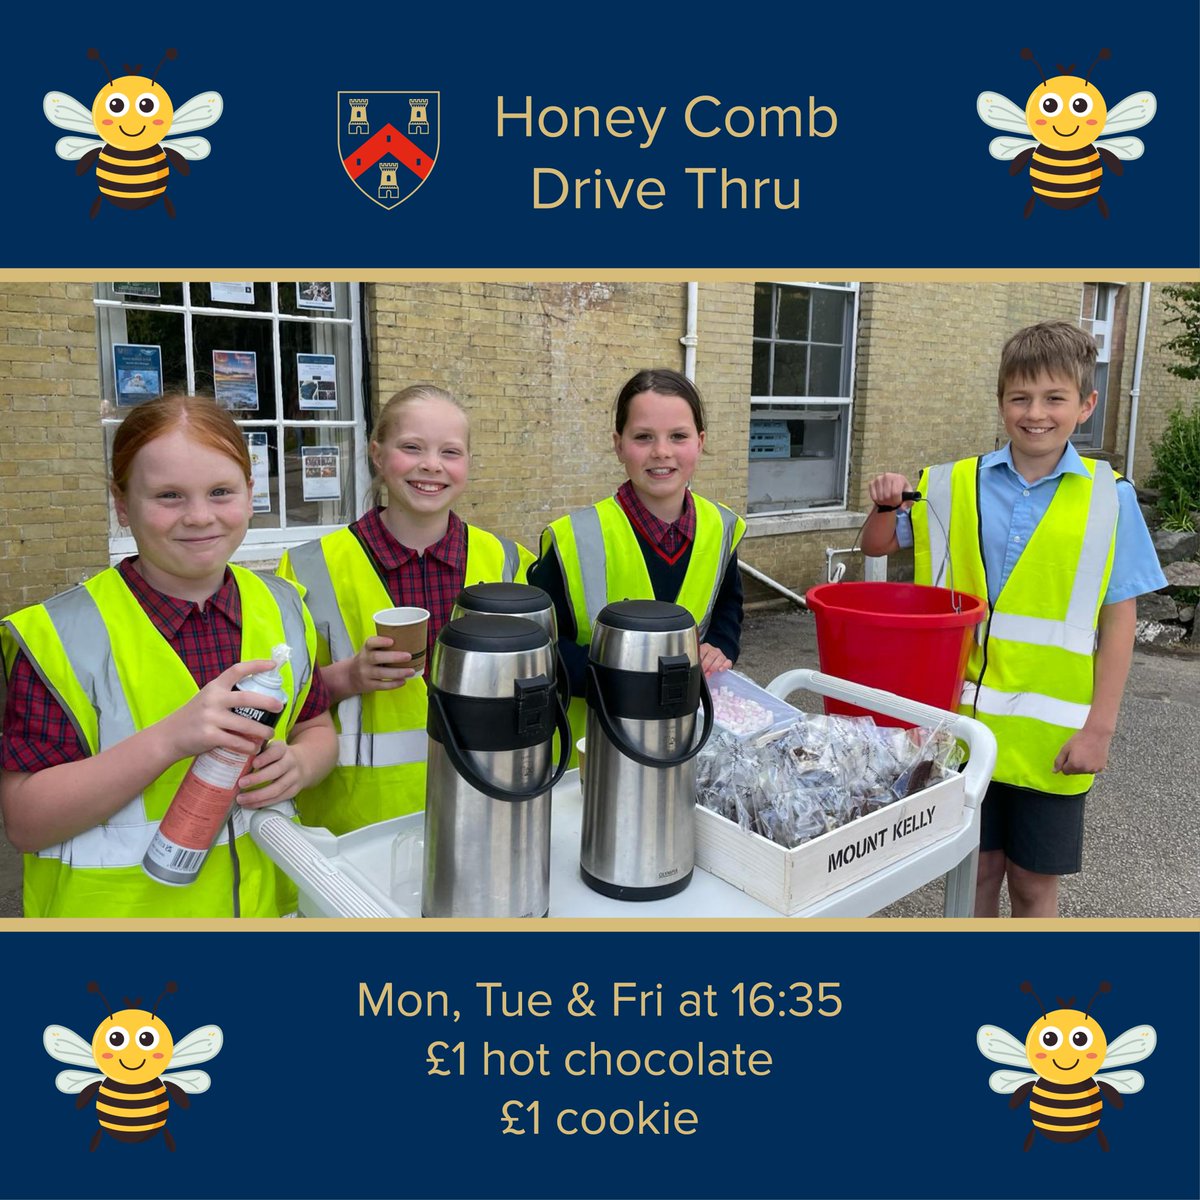 The Honey Comb Cookie Drive Thru is running every Monday, Tuesday and Friday at pick up at 16:35. £1 per hot chocolate/£1 per cookie. Remember your cash and help us raise funds for the beehives🐝